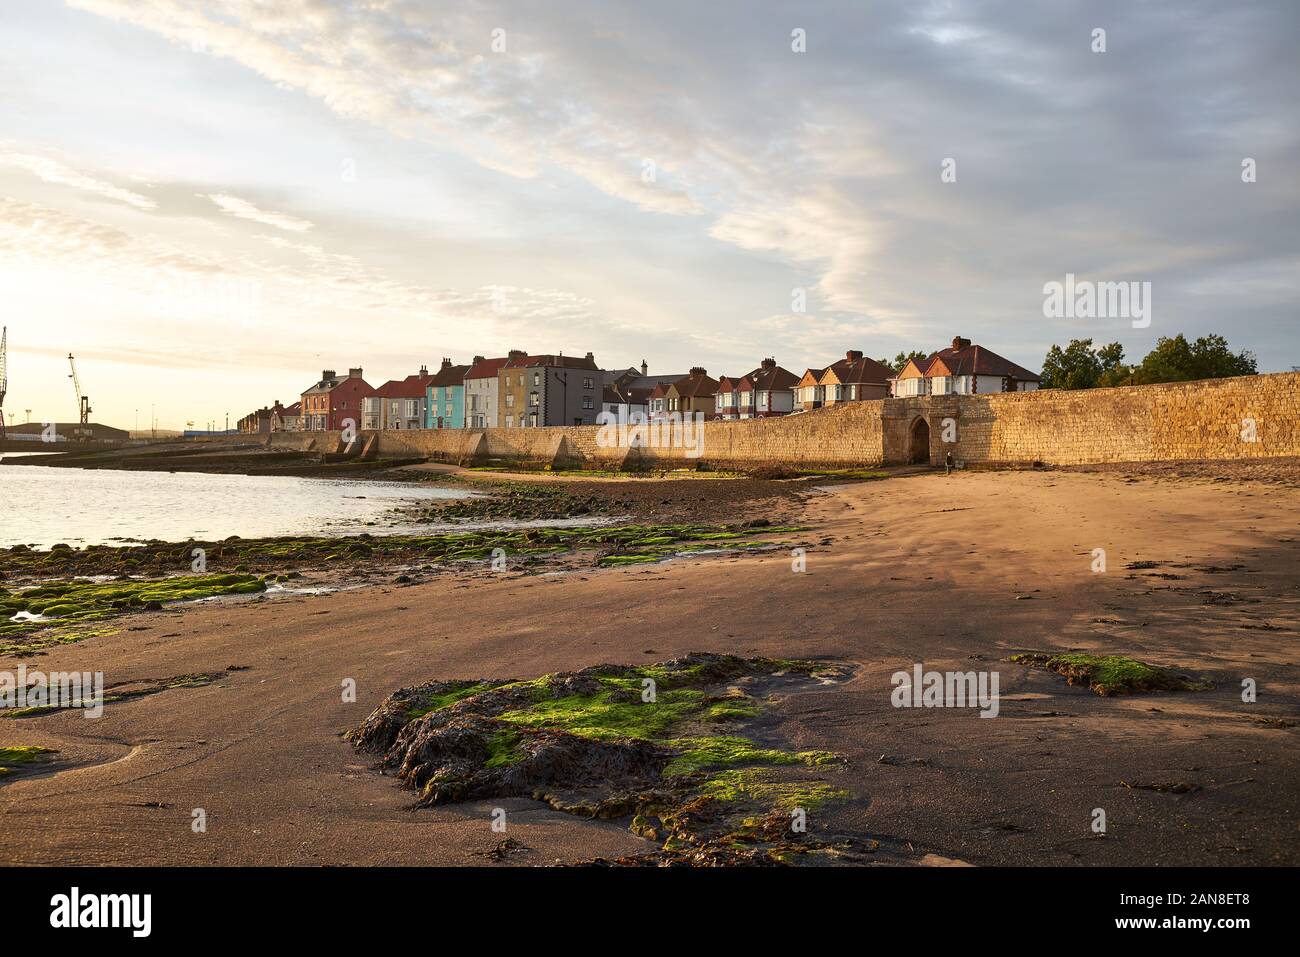 A view of the historic headland at Hartlepool, England. Stock Photo